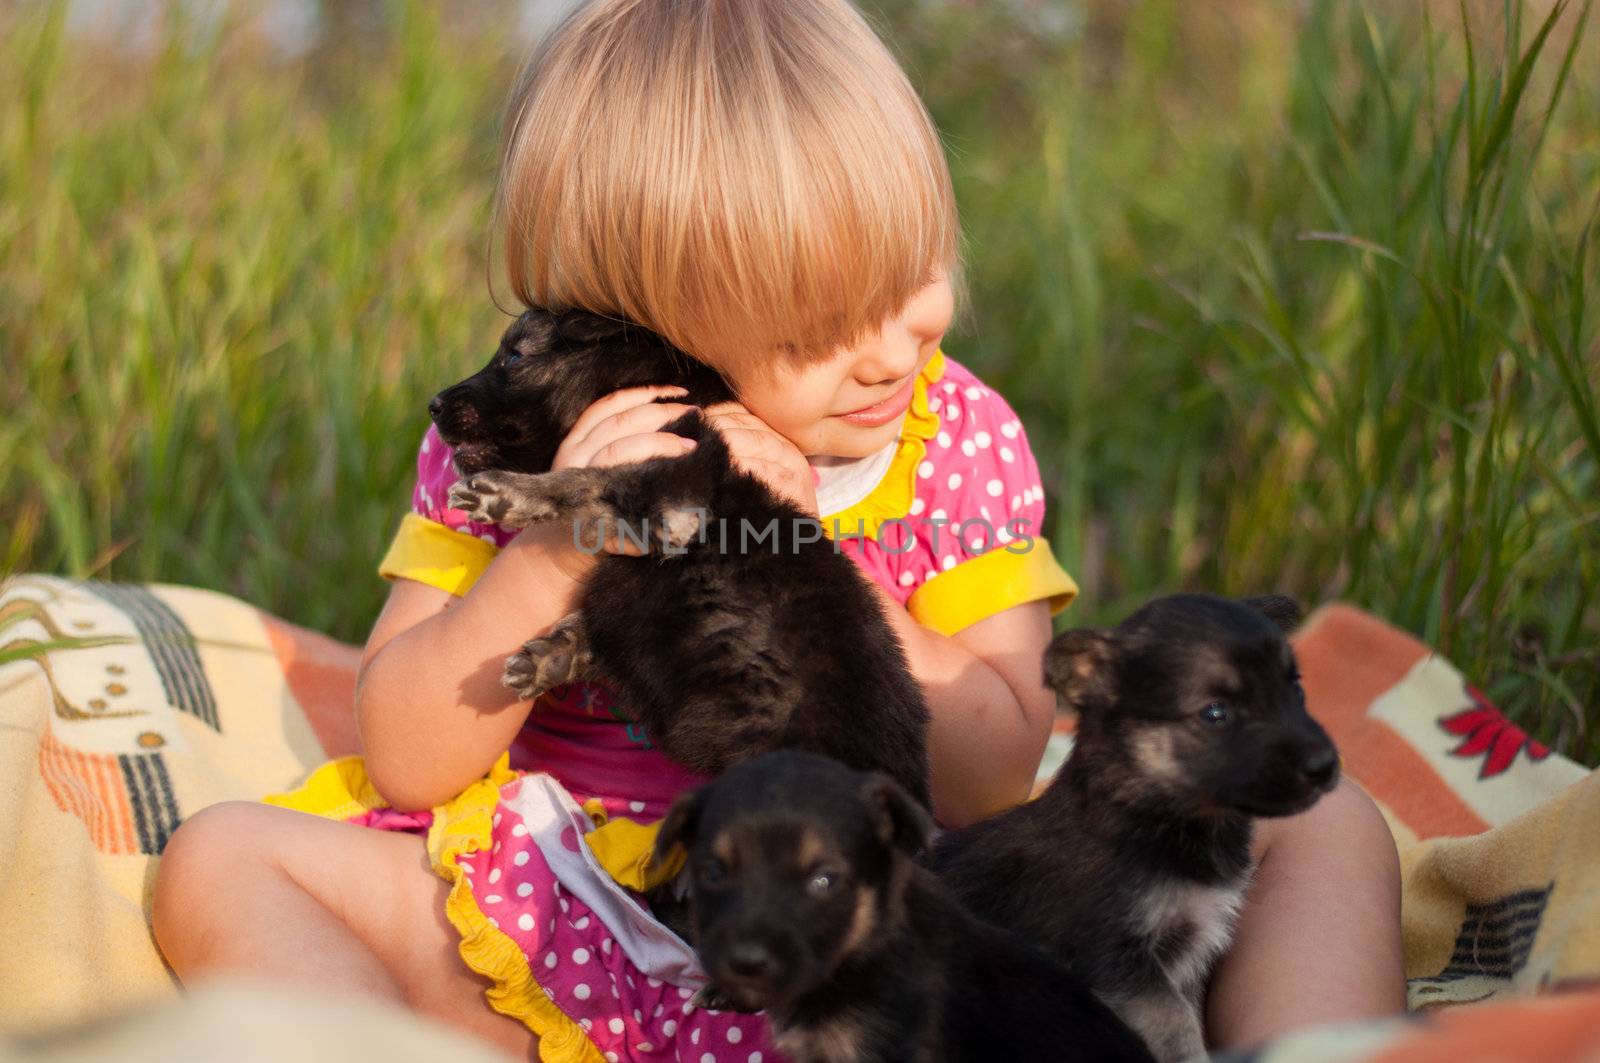 Little girl playing with puppies by olgavolodina